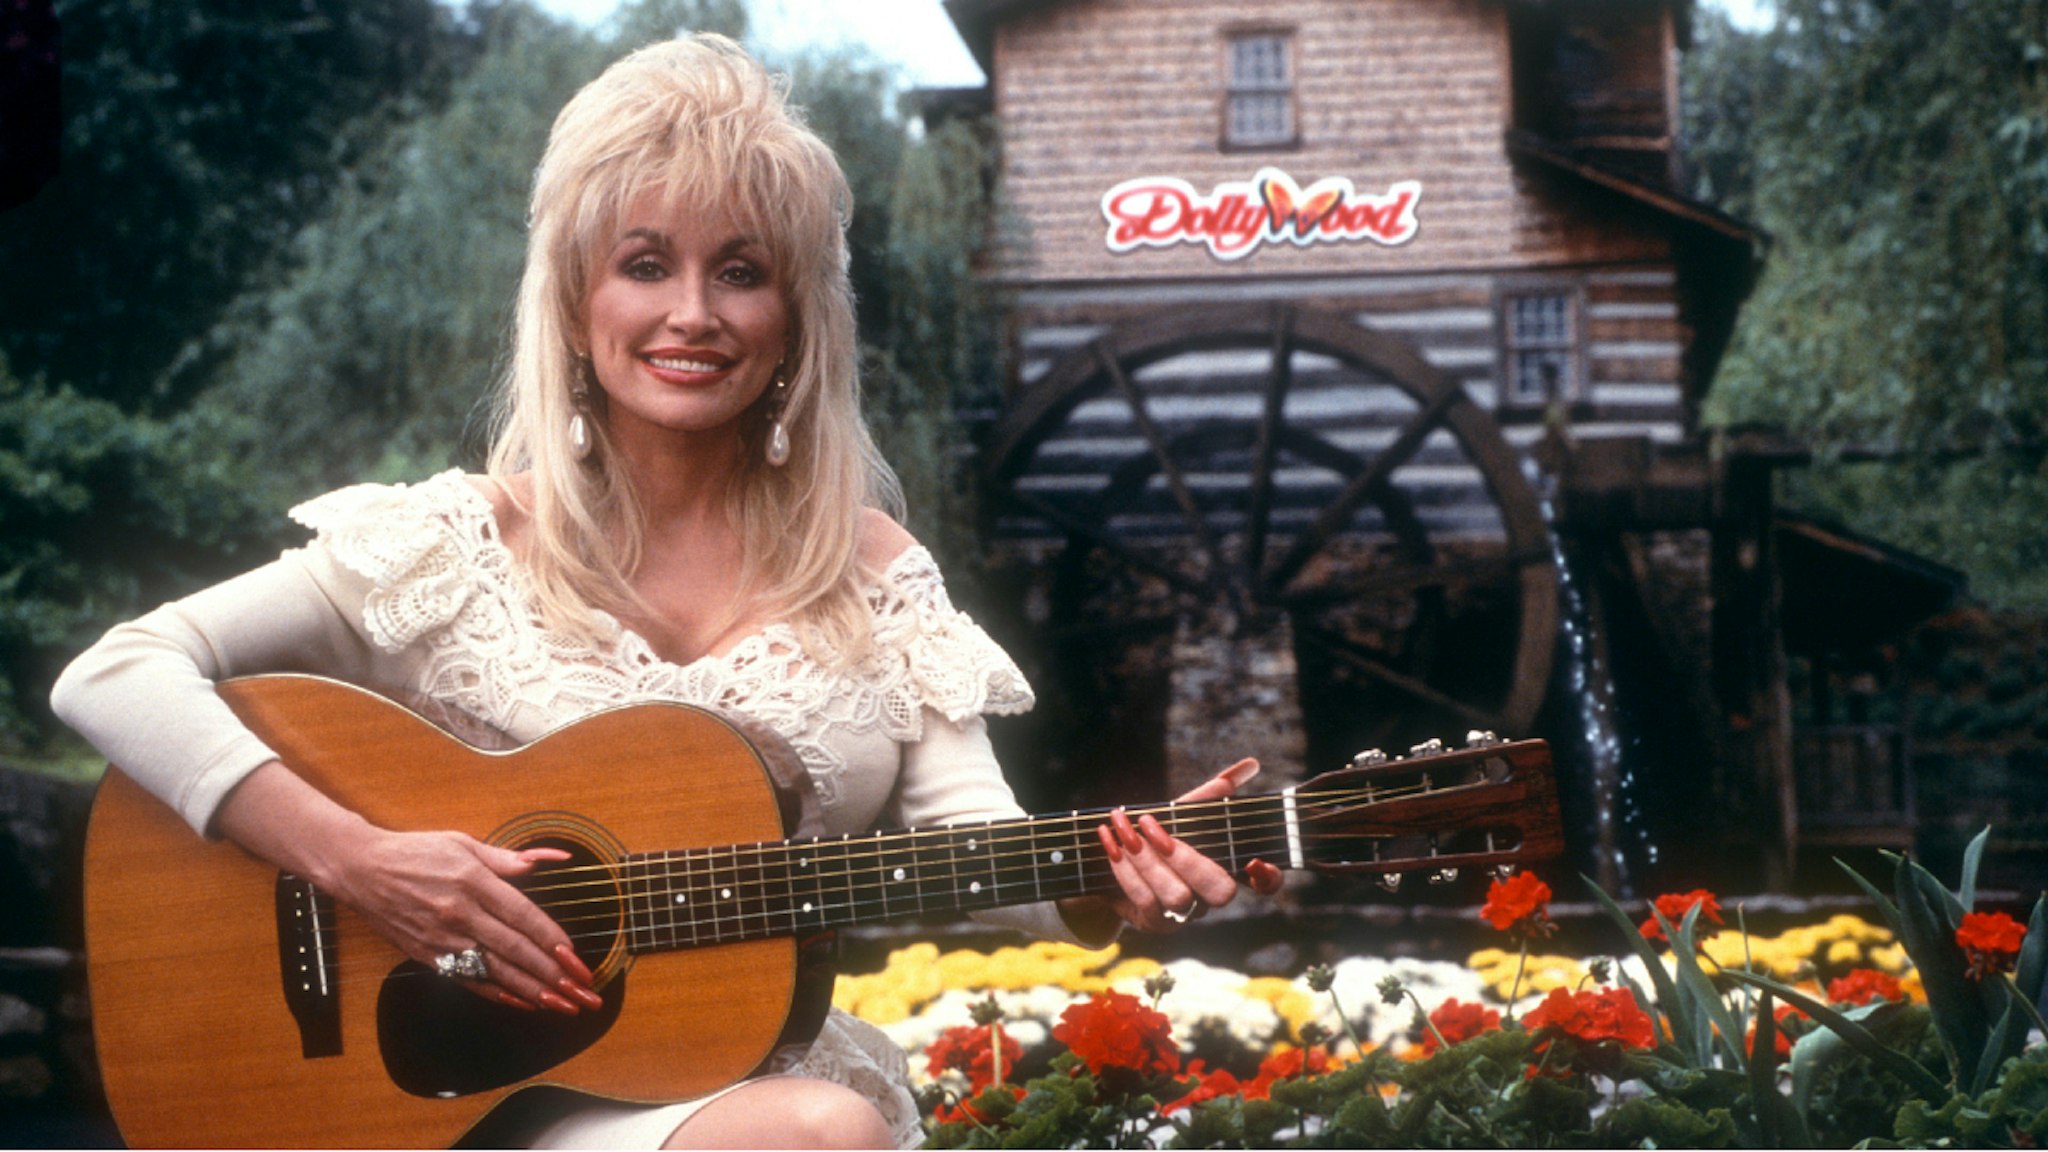 PIGEON FORGE, TN - 1993: American singer and songwriter Dolly Parton poses for a portrait with her guitar at Dollywood circa 1993 in Pigeon Forge, Tennessee.